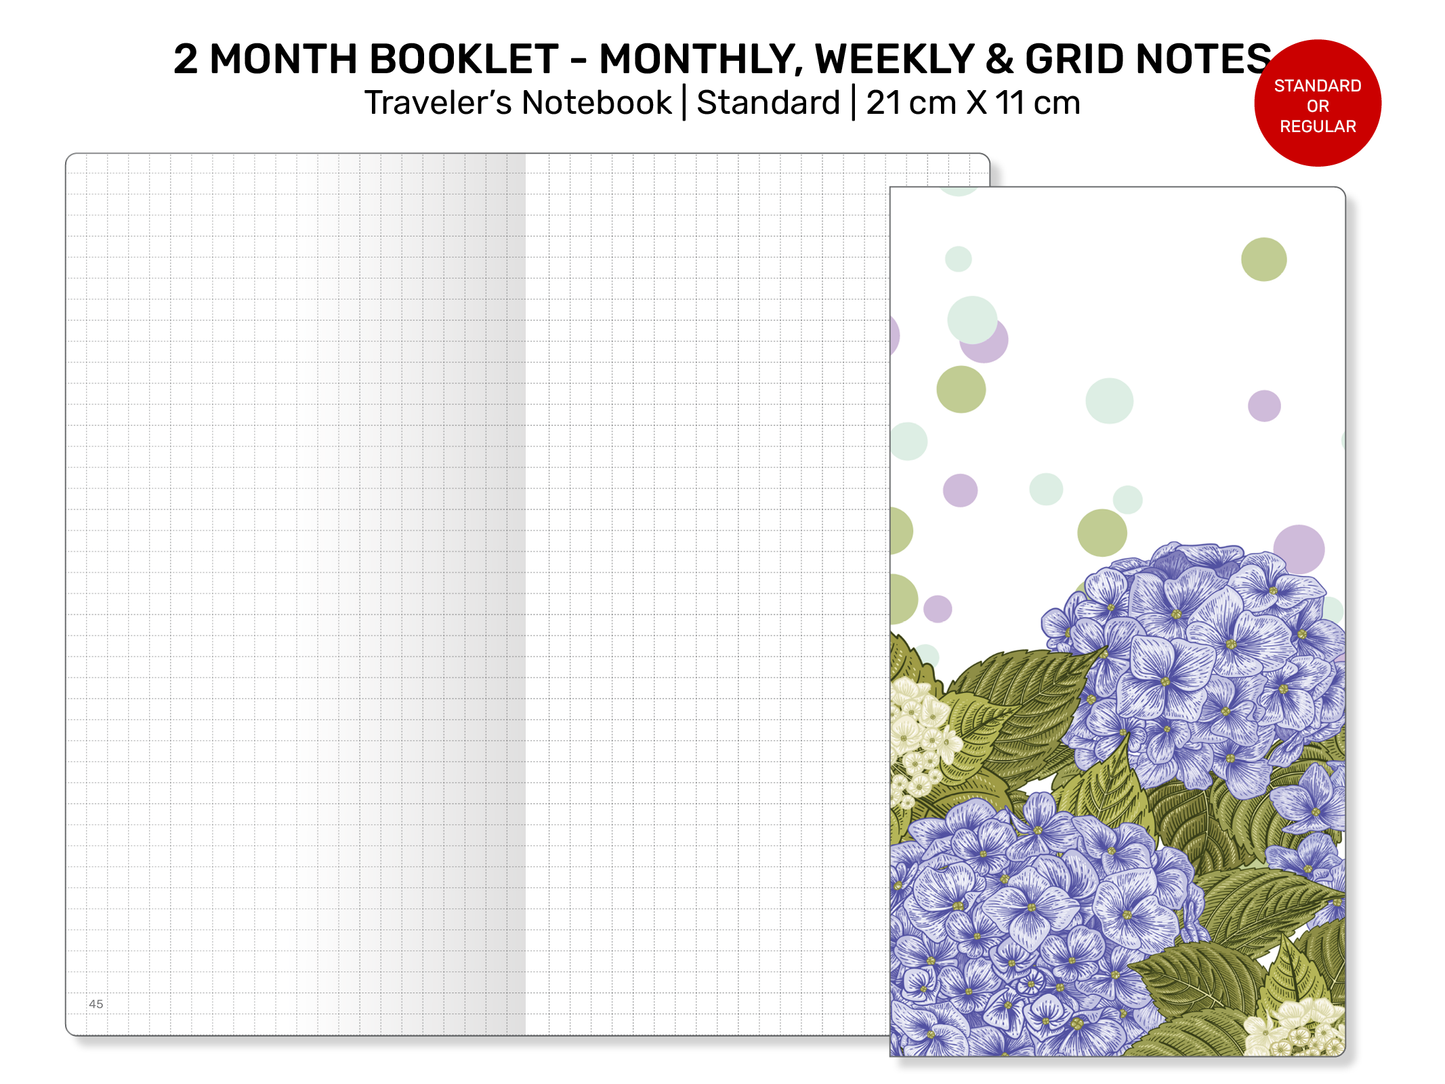 Standard TN 2-MONTH Booklet - Monthly, Weekly, Index, Grid Notes Printable Traveler's Notebook Insert Refill Grid - RTN043V2